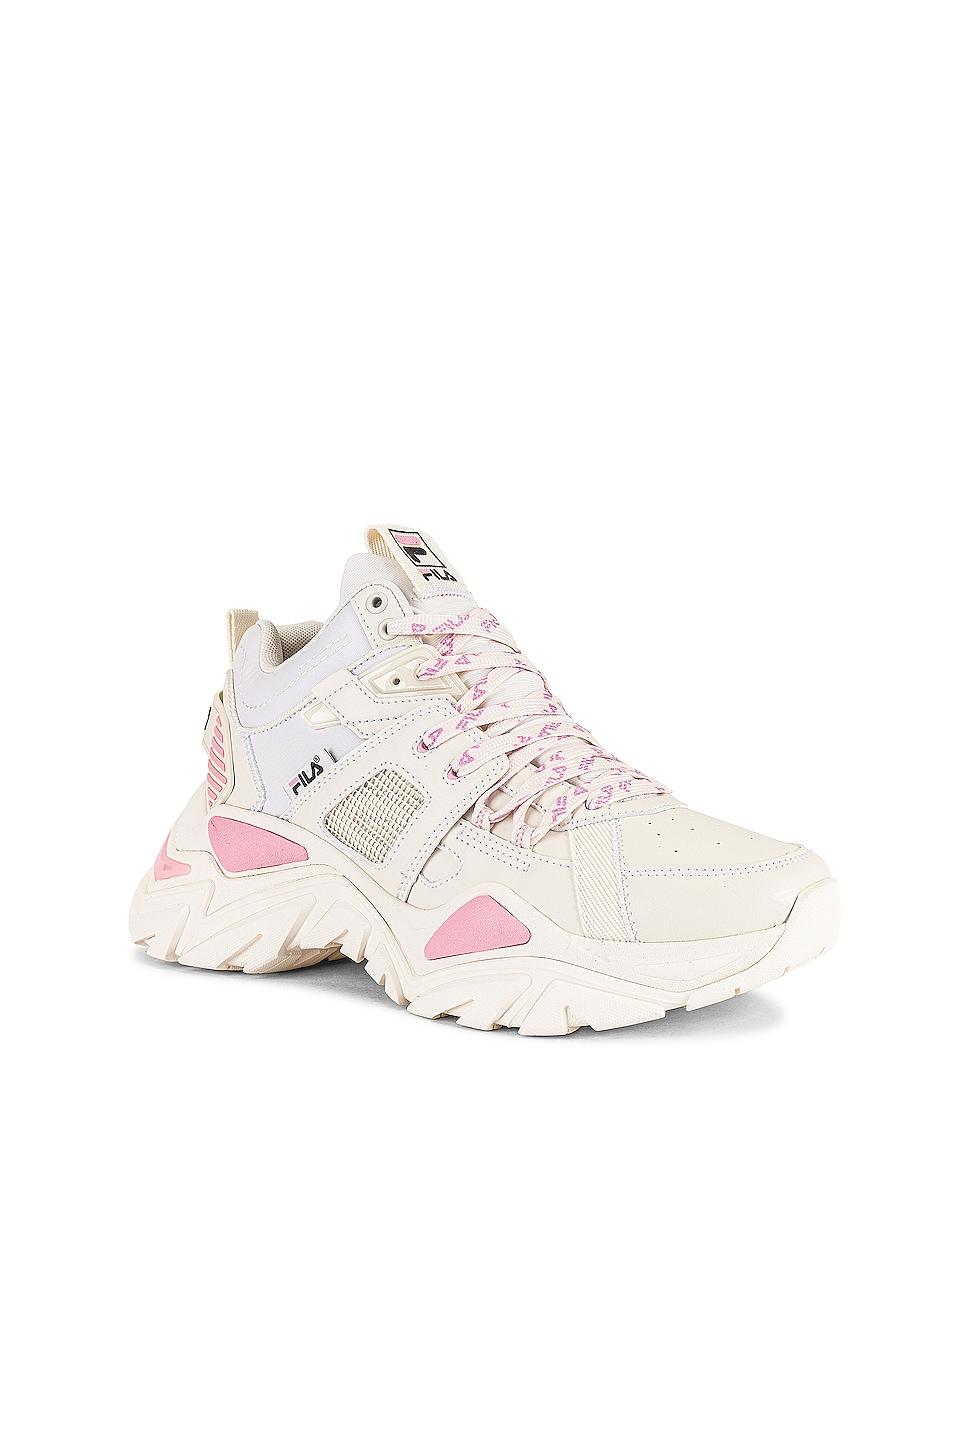 Fila Cage Mid Mixed Media Sneaker in Pink | Lyst